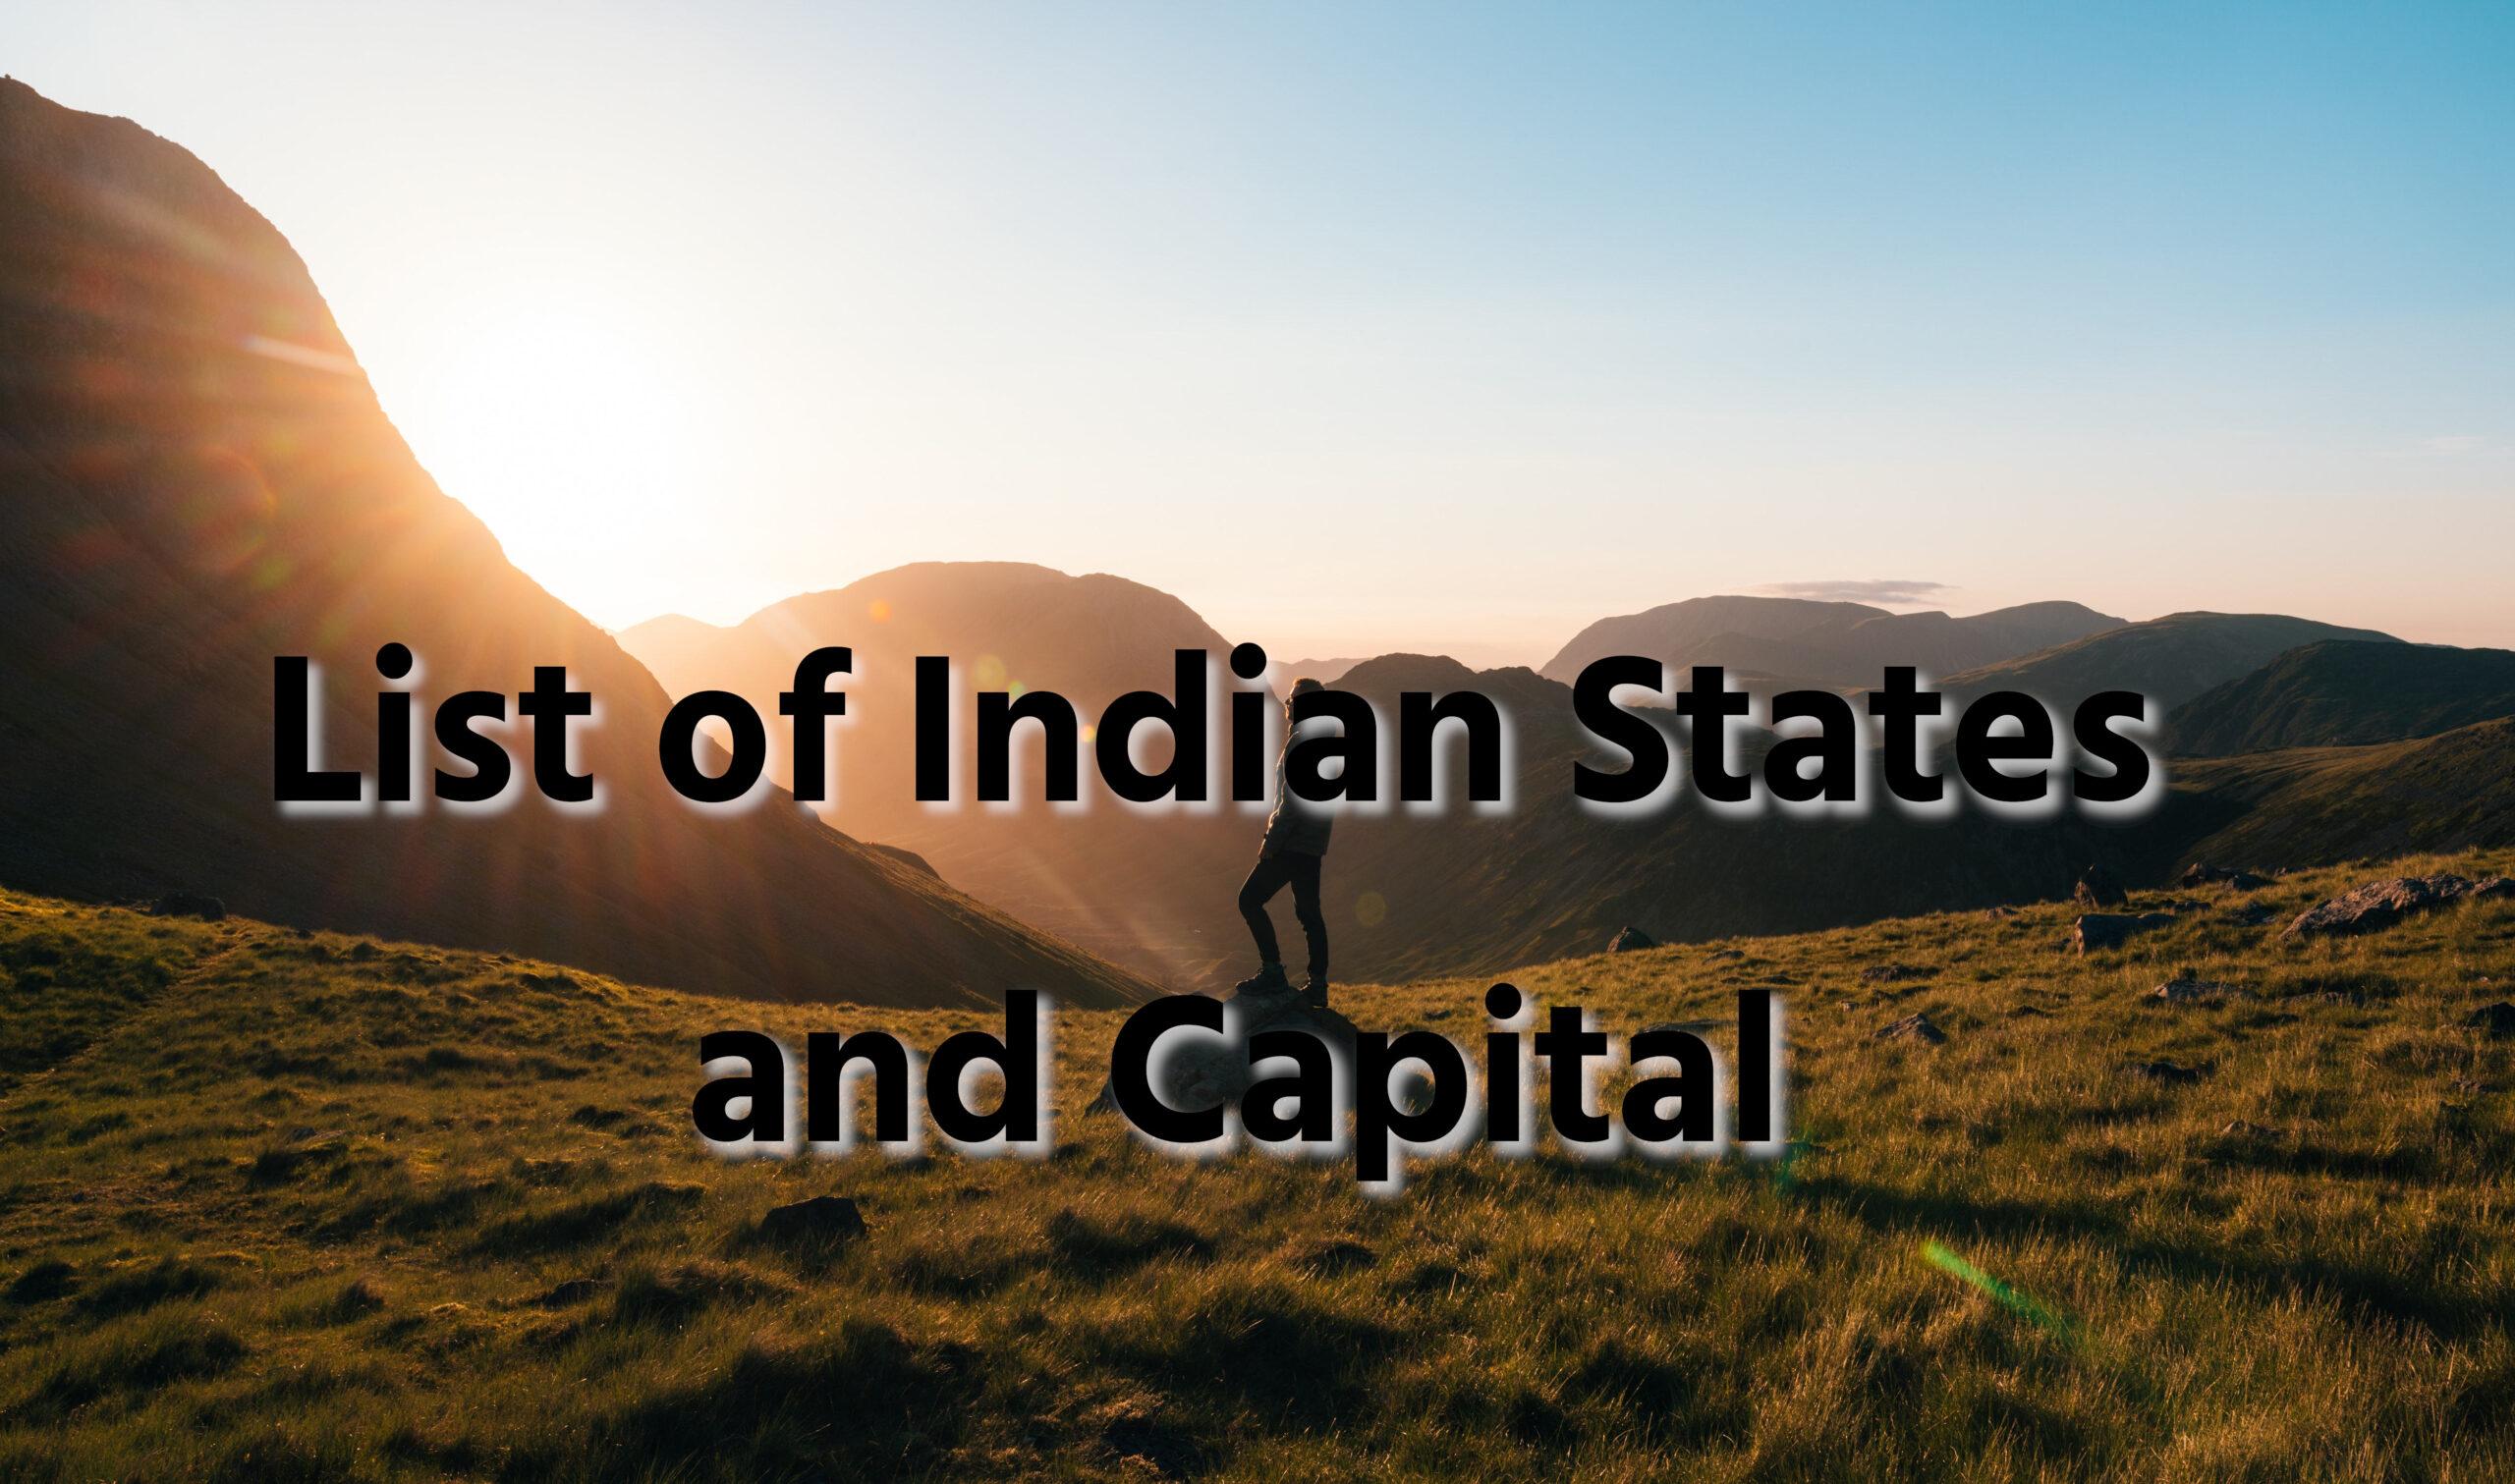 List of Indian States and Capital